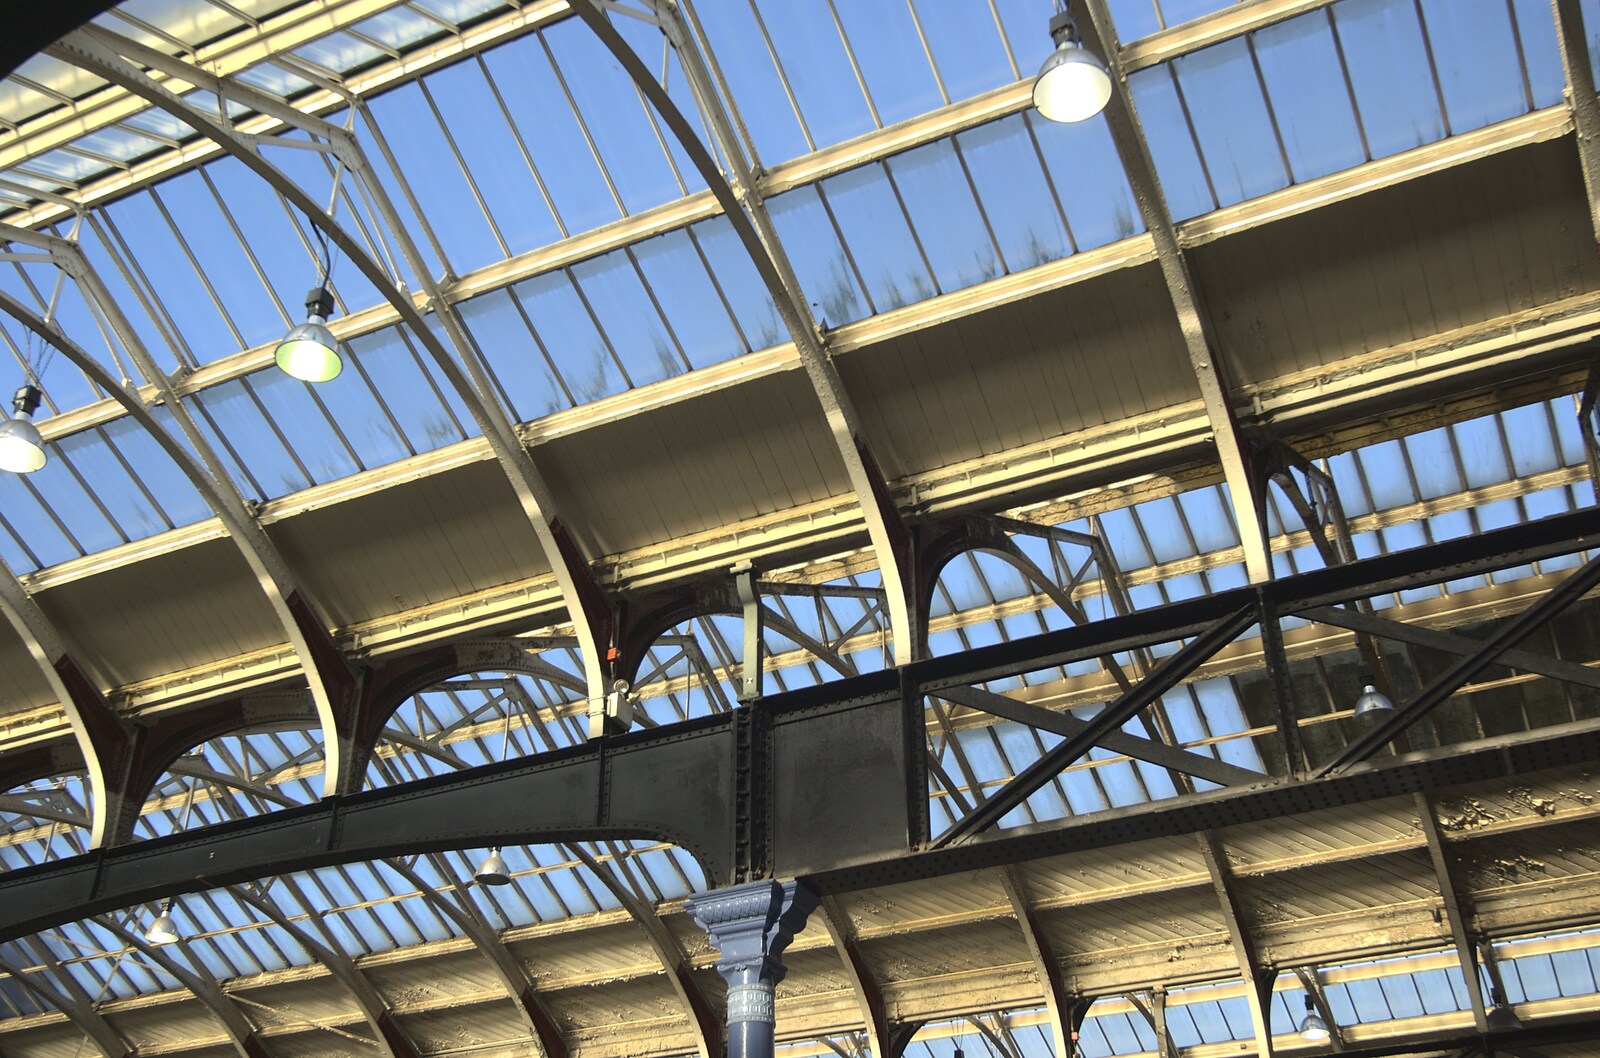 Norwich By Train, Norfolk - 16th October 2010: The attractive Victorian roof of Norwich Station